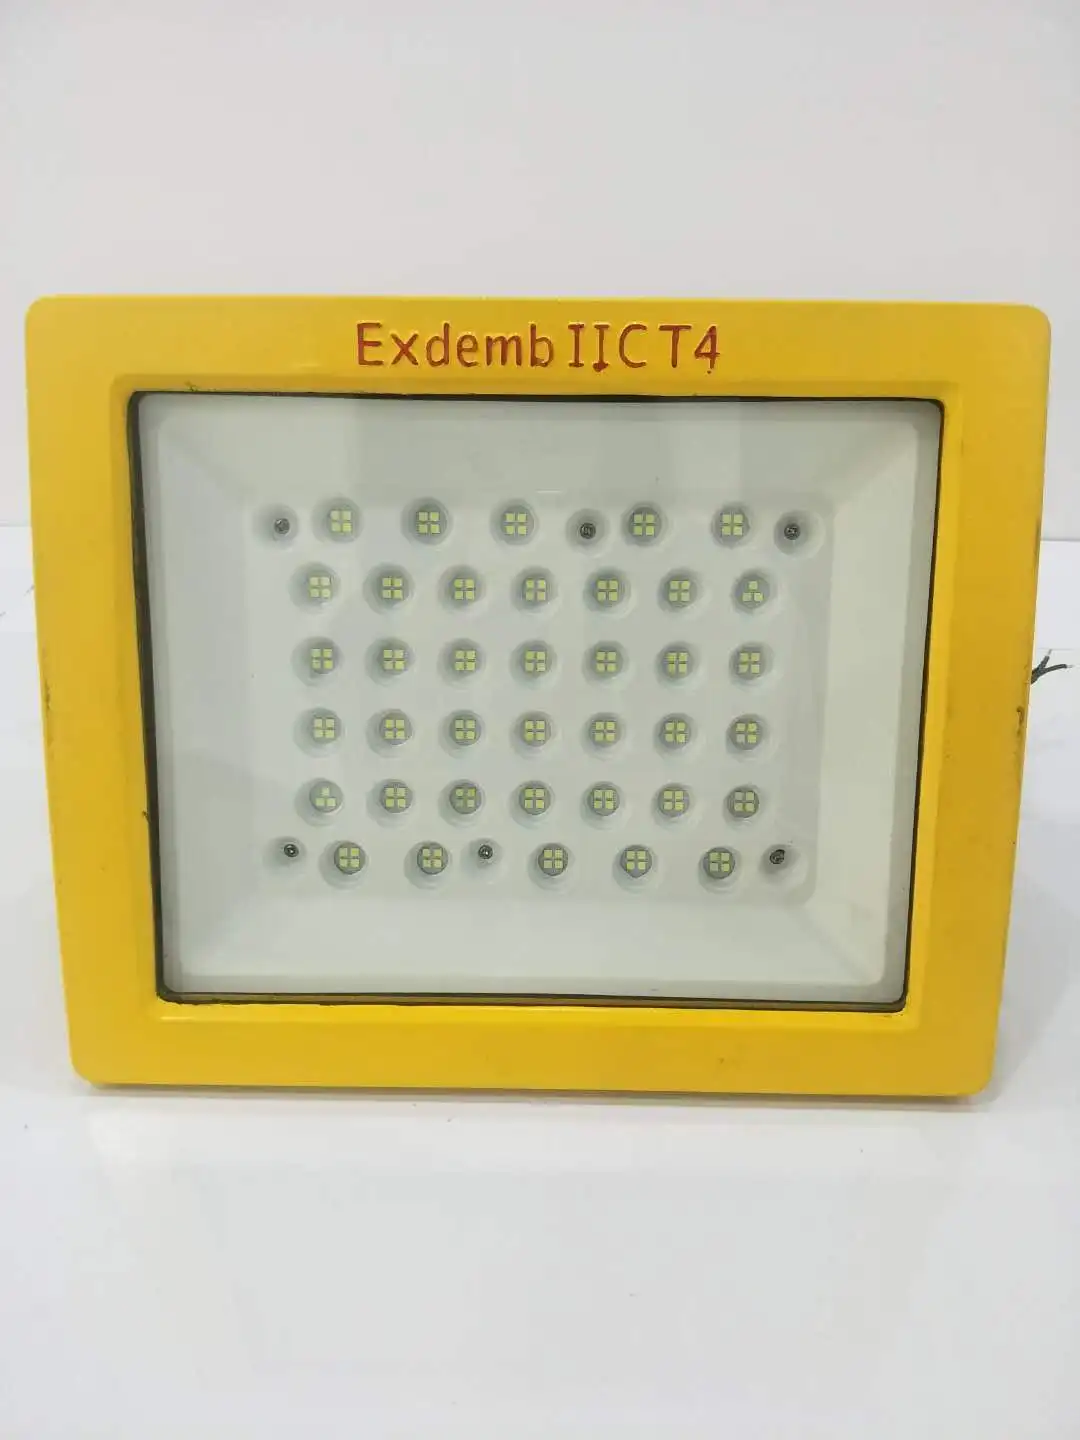 

Square LED Explosion-Proof Light, IP66 Waterproof Explosion-Proof LED Light, Exdemb II CT4 and WF2, Powder Factory, Gas Station.